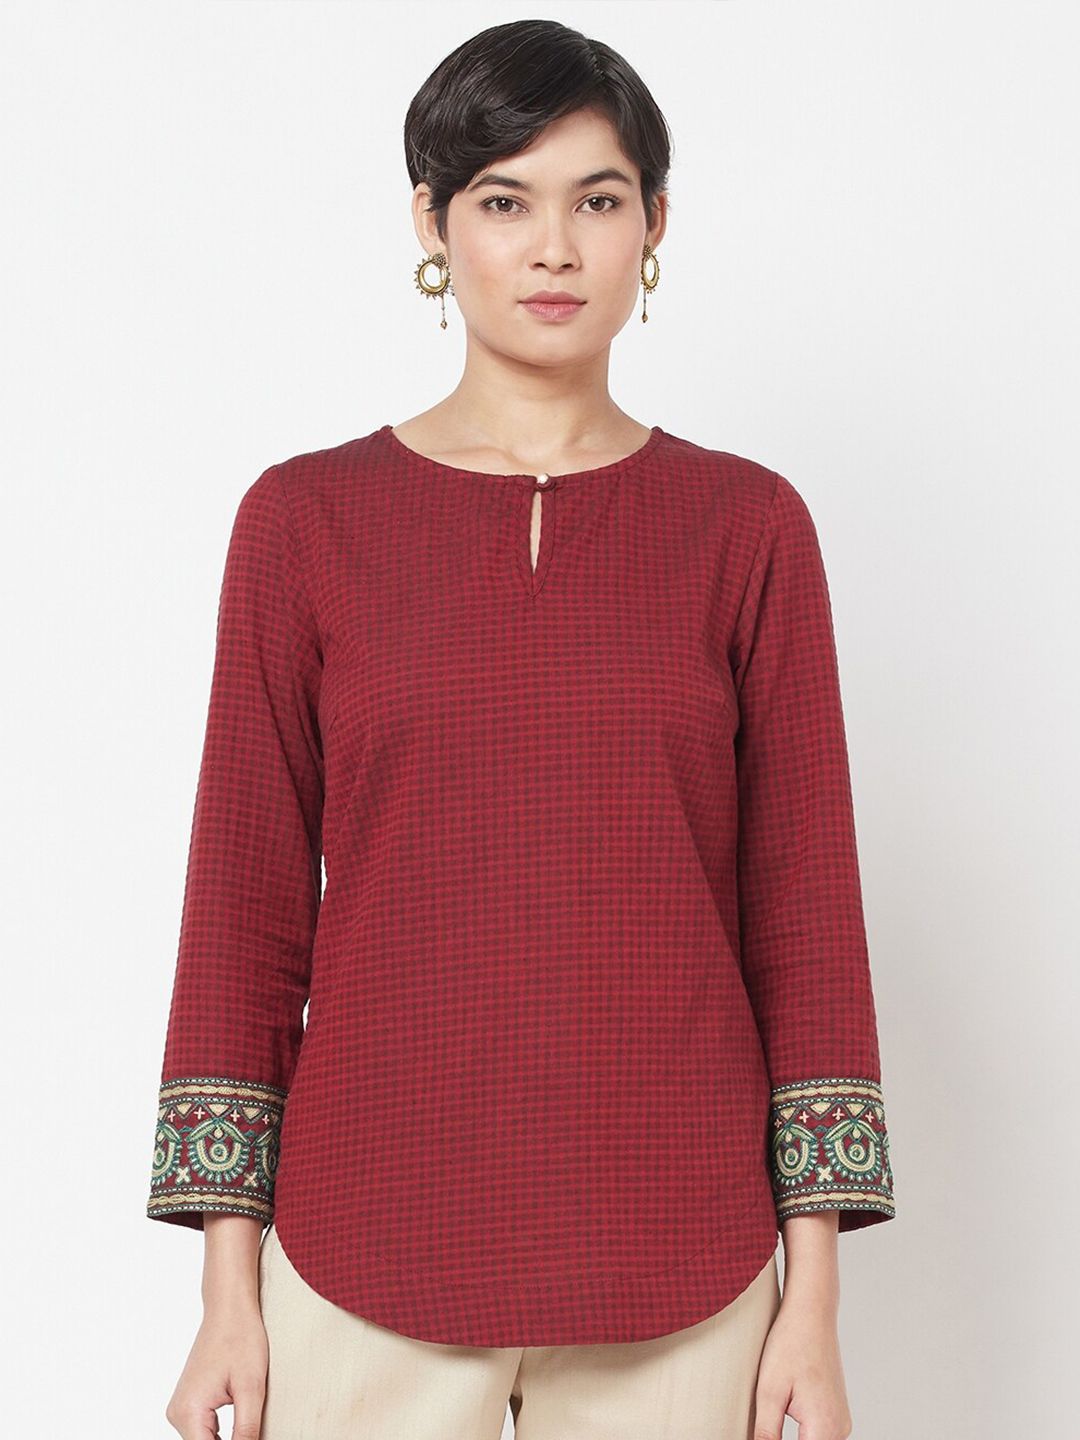 Fabindia Maroon Checked Keyhole Neck Top Price in India